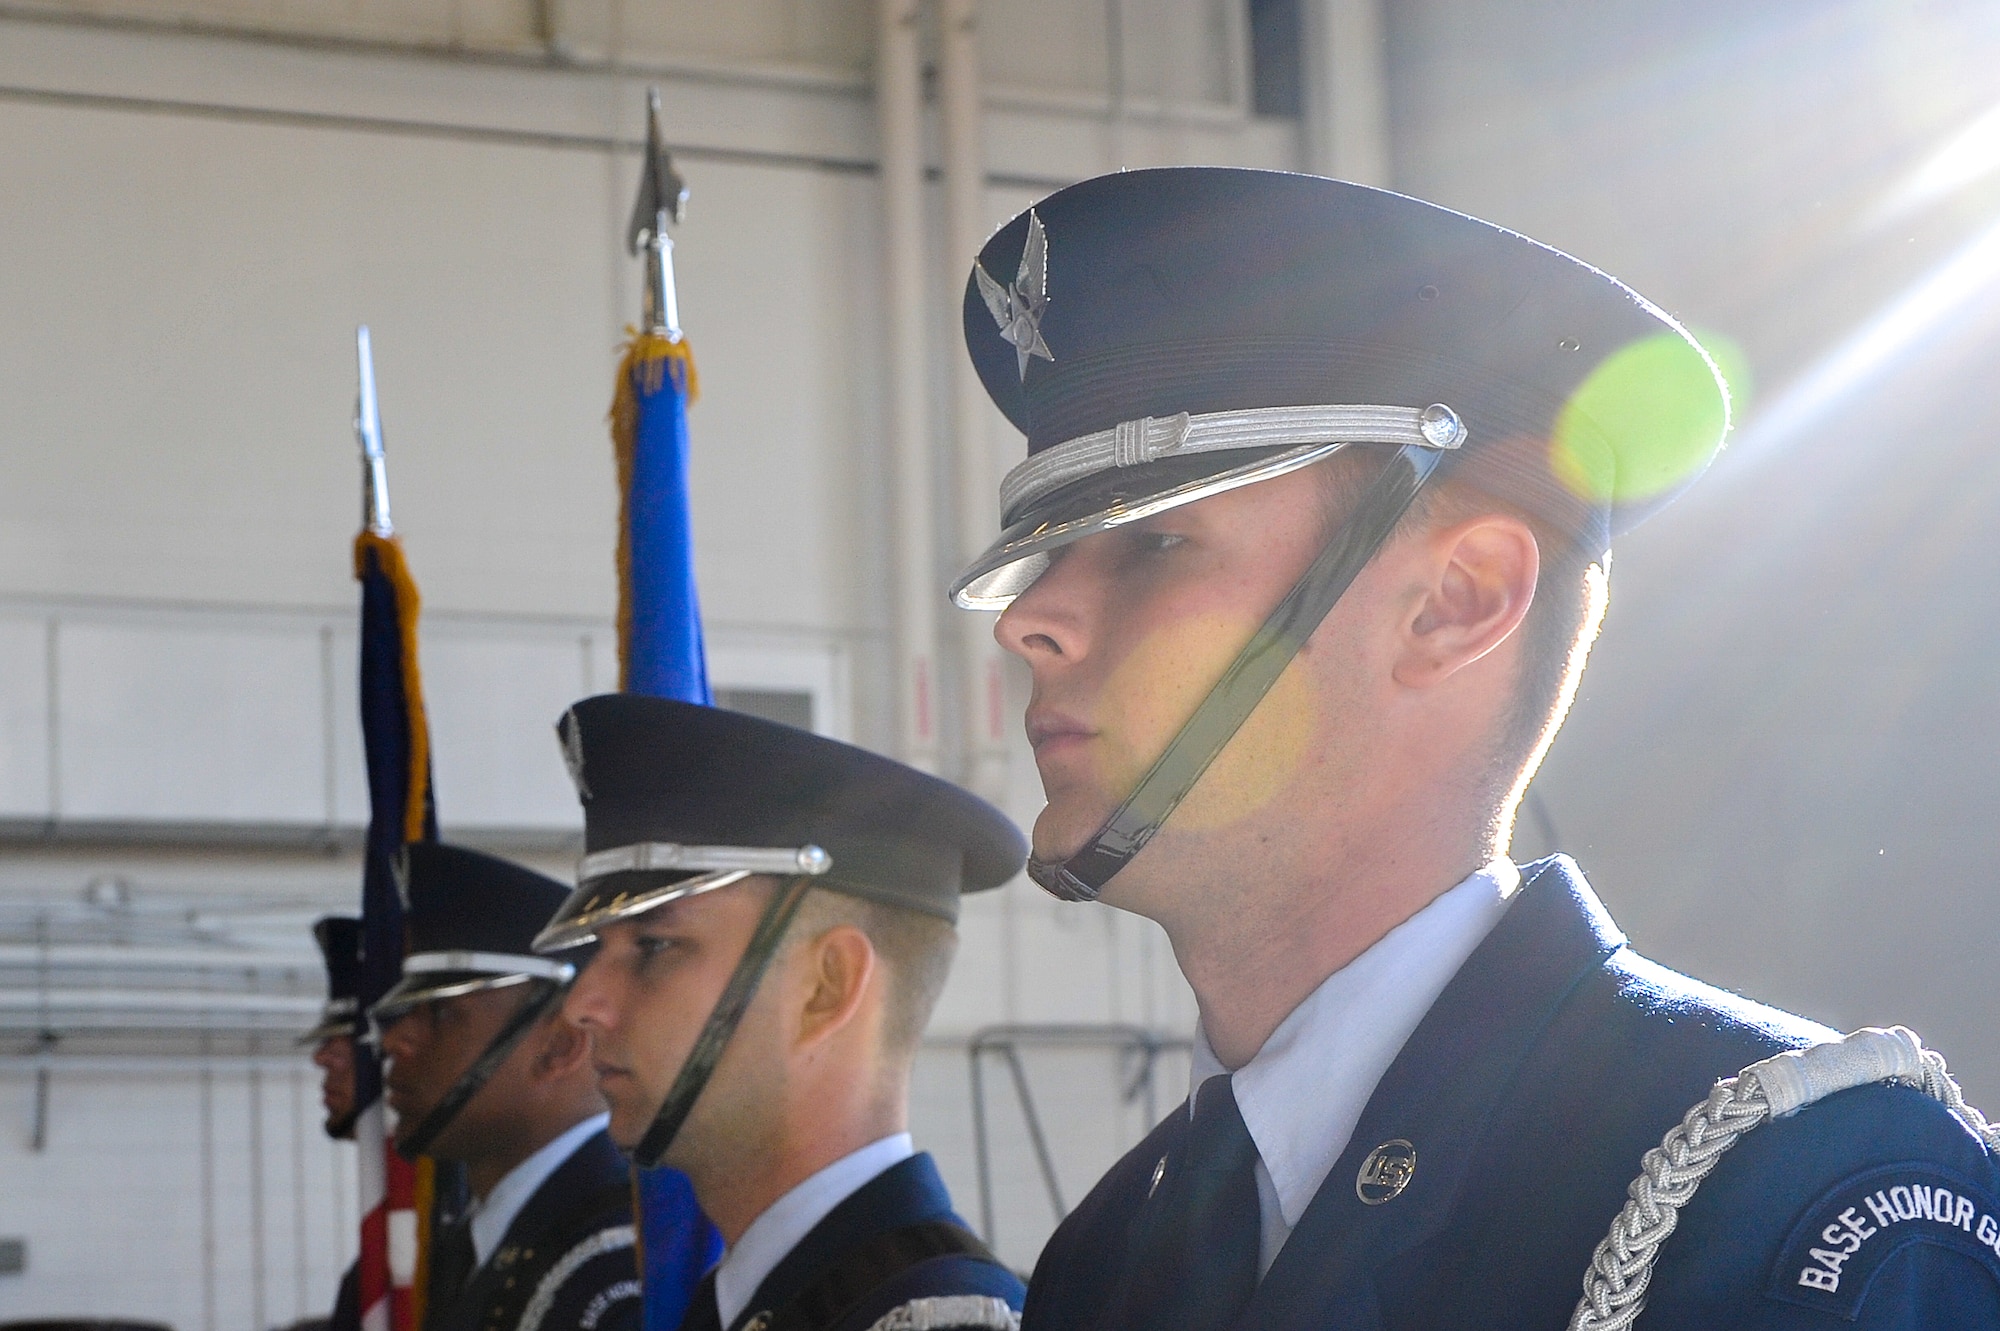 Hurlburt Field Honor Guard members stand ready to post the colors during an Air Force Cross ceremony at the Freedom Hangar on Hurlburt Field, Fla., Dec. 17, 2014. Master Sgt. Ivan Ruiz, a pararescueman from the 56th Rescue Squadron, Royal Air Force Lakenheath, England, is the sixth U.S. military member to be awarded the Air Force Cross since 9/11. All six Airmen who received this medal, including Ruiz, have all been Special Tactics Airmen. (U.S. Air Force photo/Airman 1st Class Jeff Parkinson)